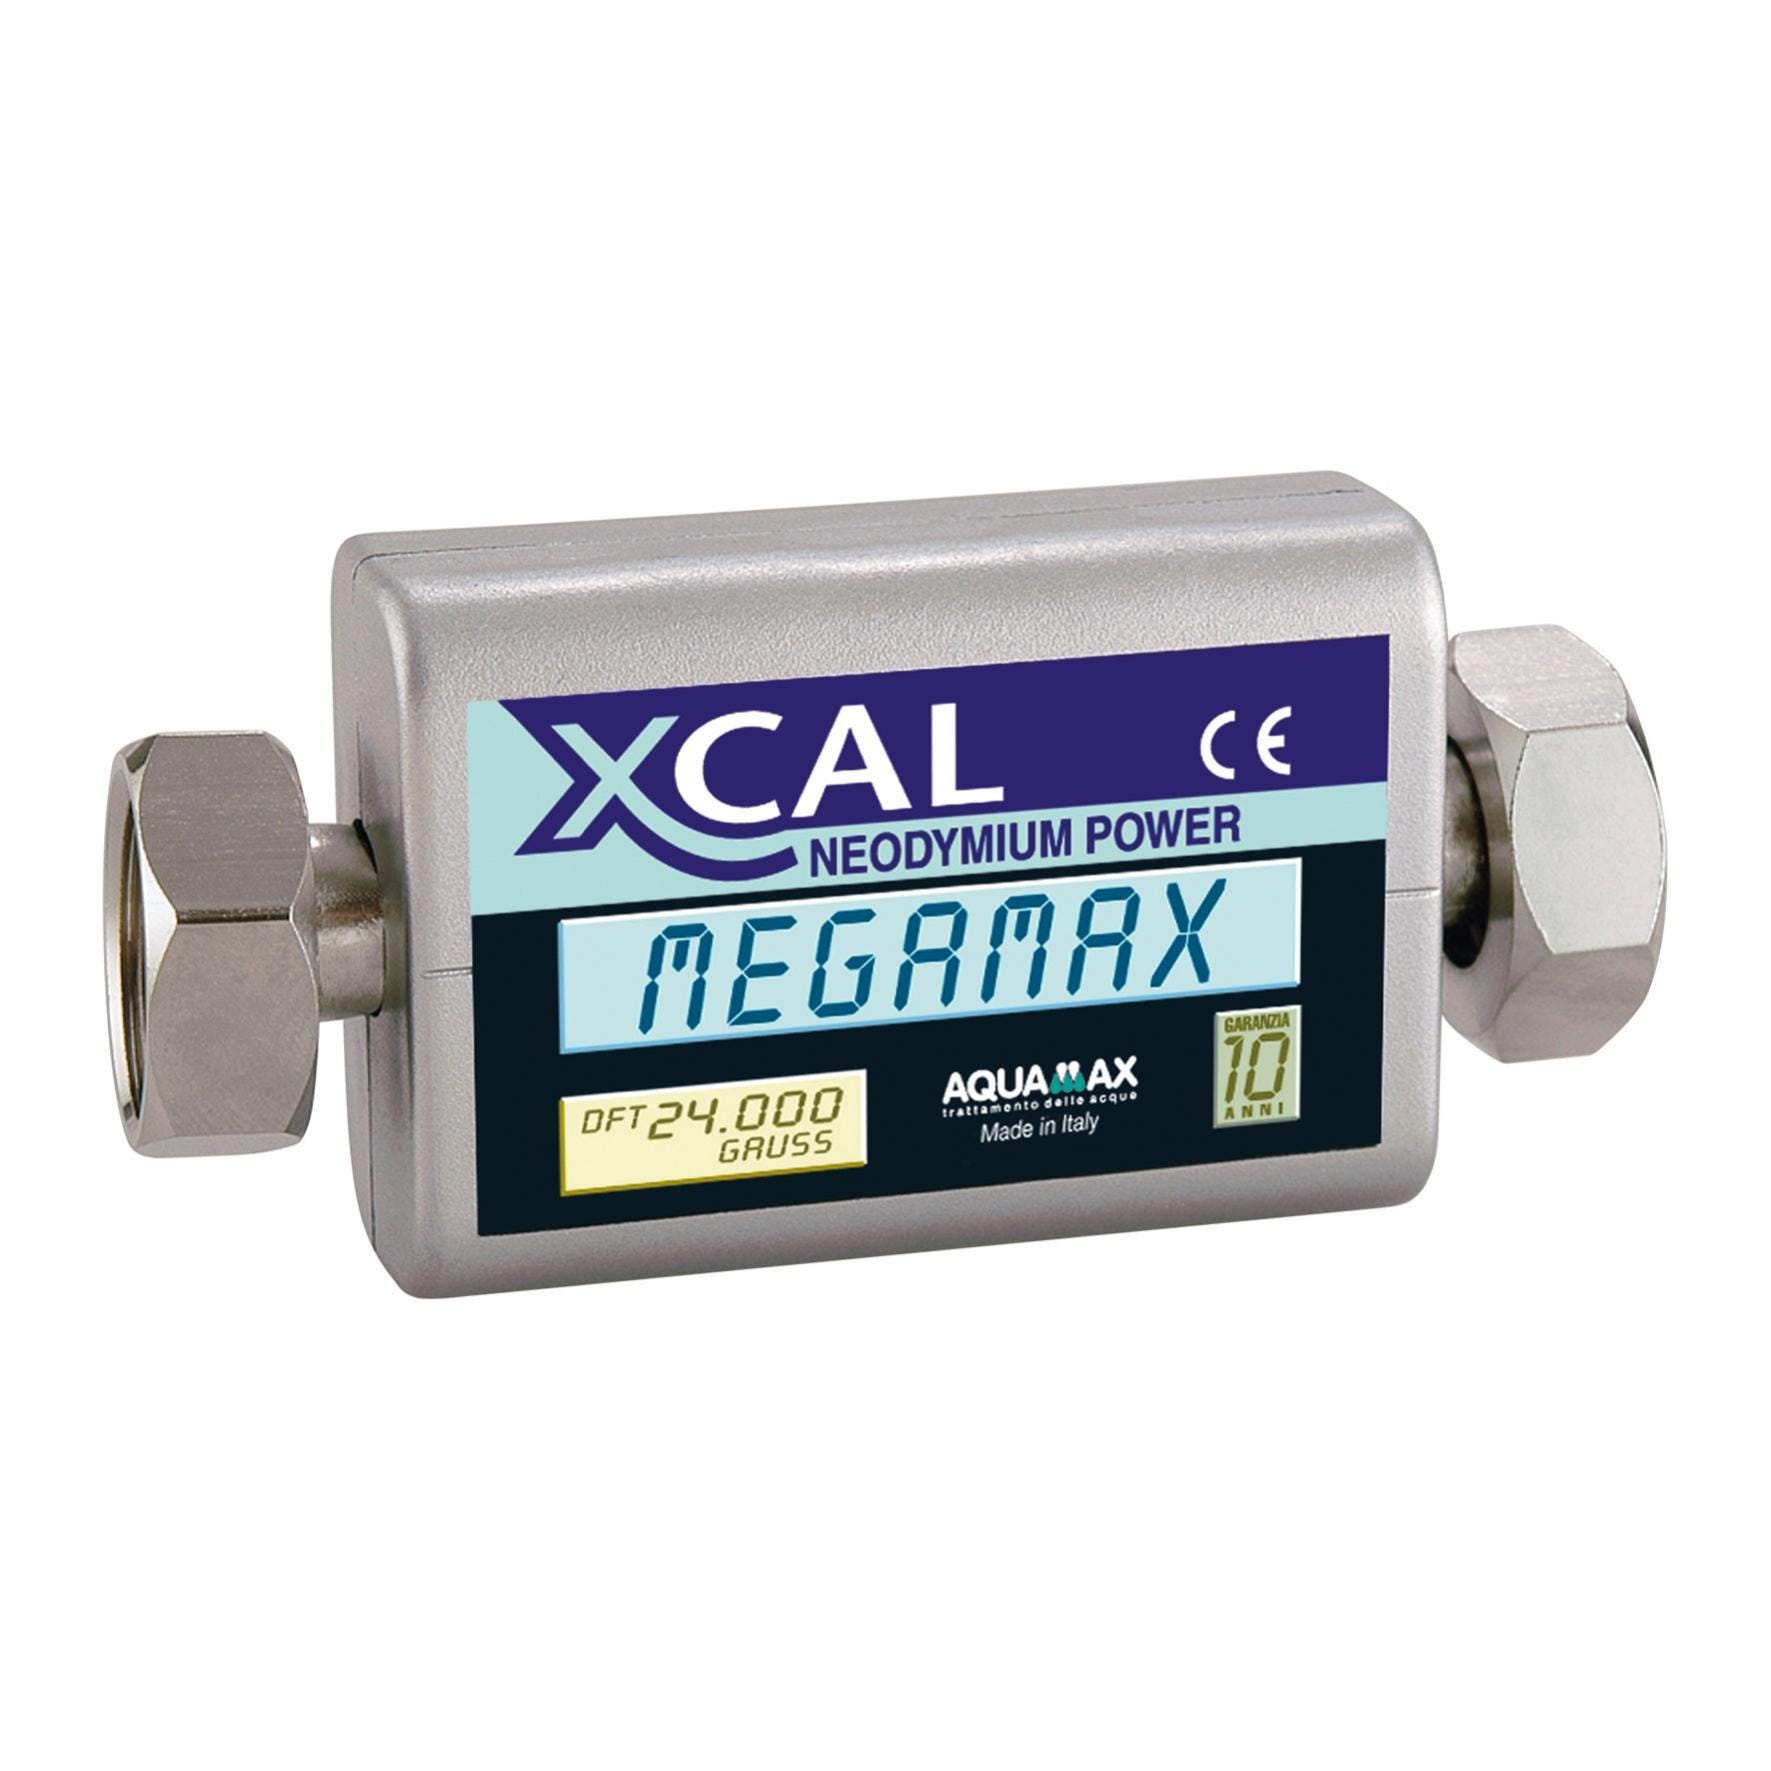 Anticalcare magnetico Xcal megamax